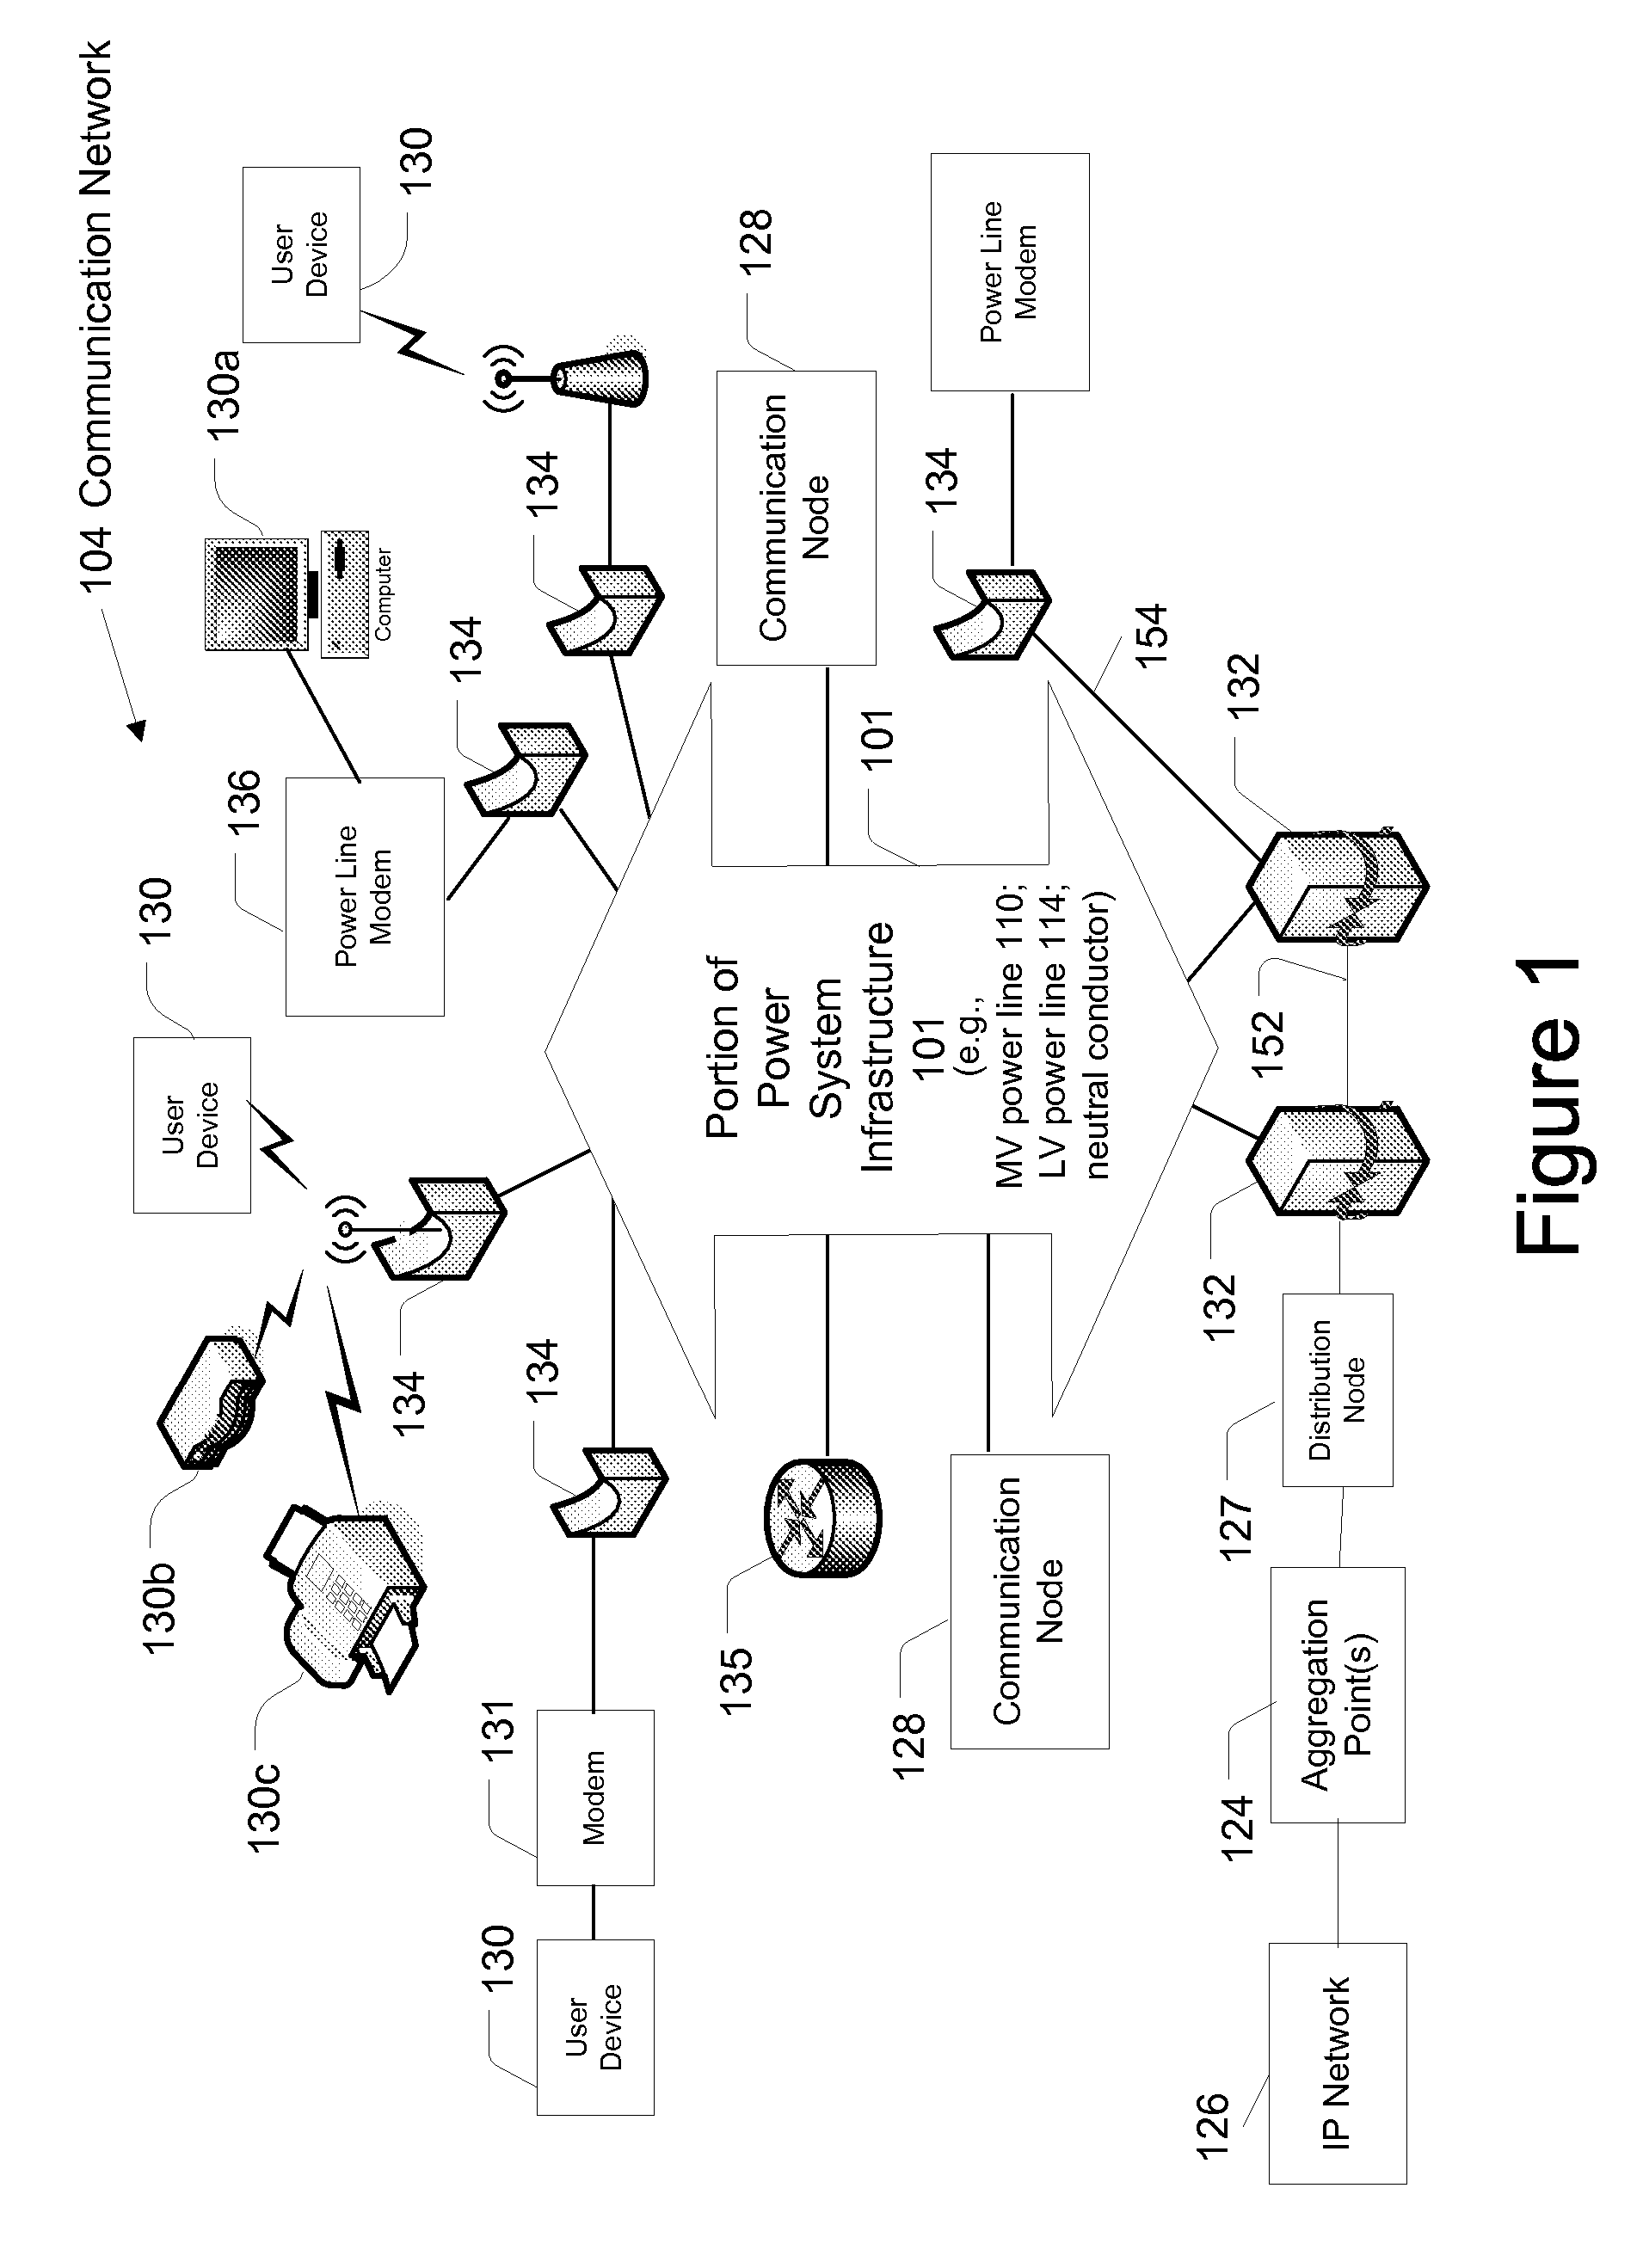 Power Line Communication Device and Method